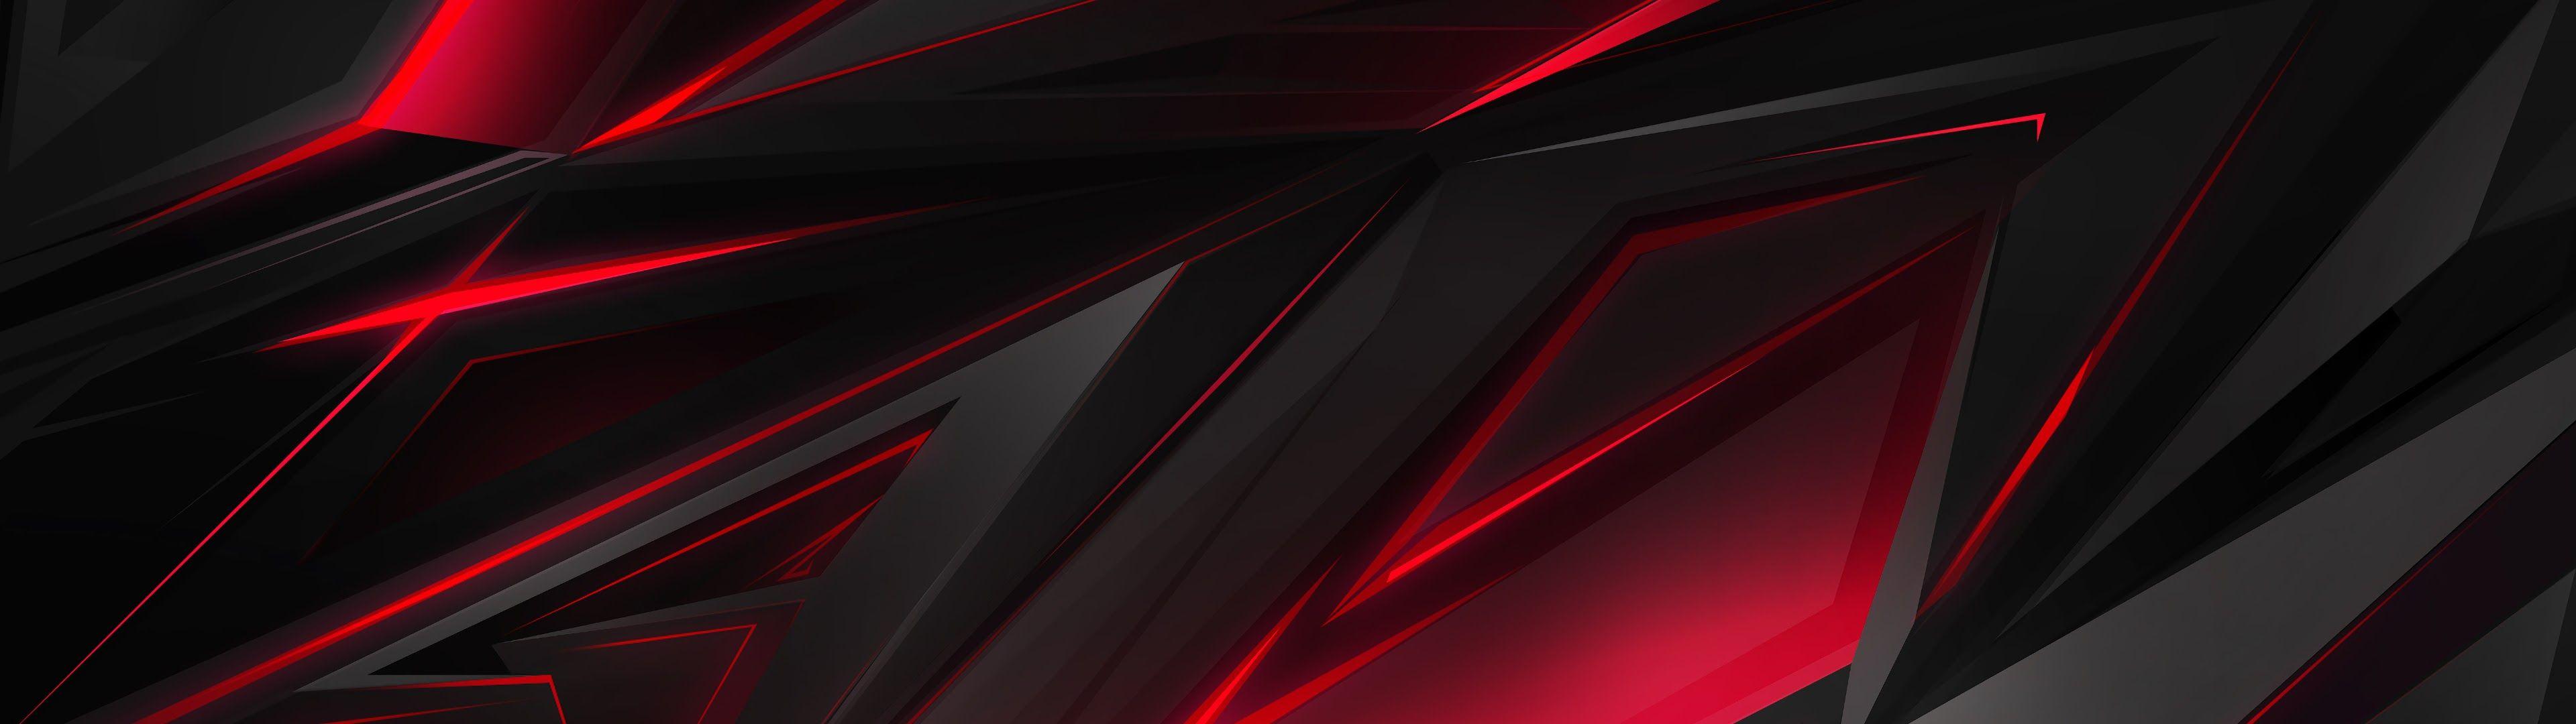 Red and Black Dual Monitor Wallpaper Free Red and Black Dual Monitor Background